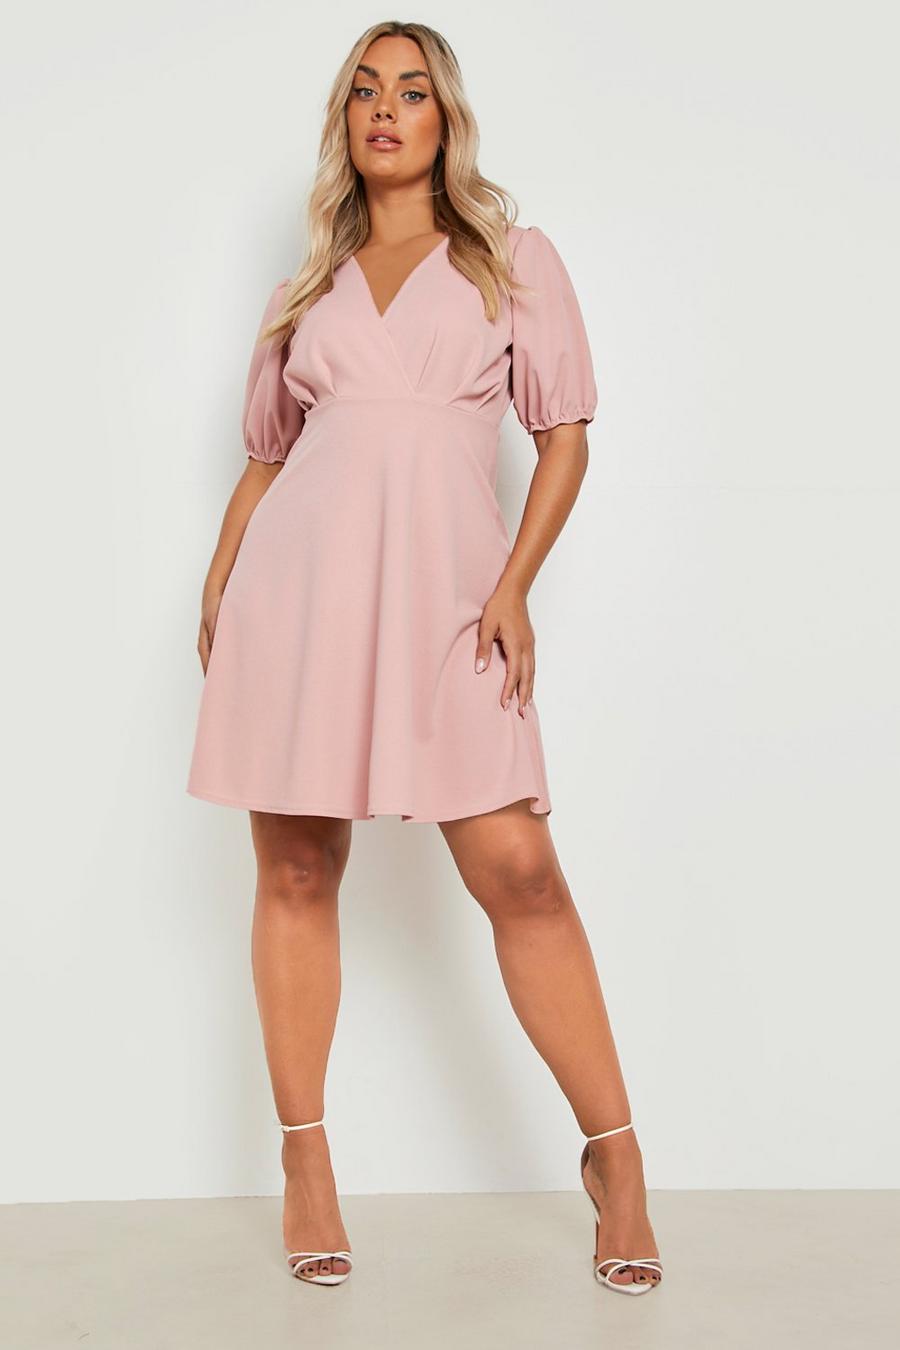 Grande taille - Robe patineuse à manches bouffantes, Blush